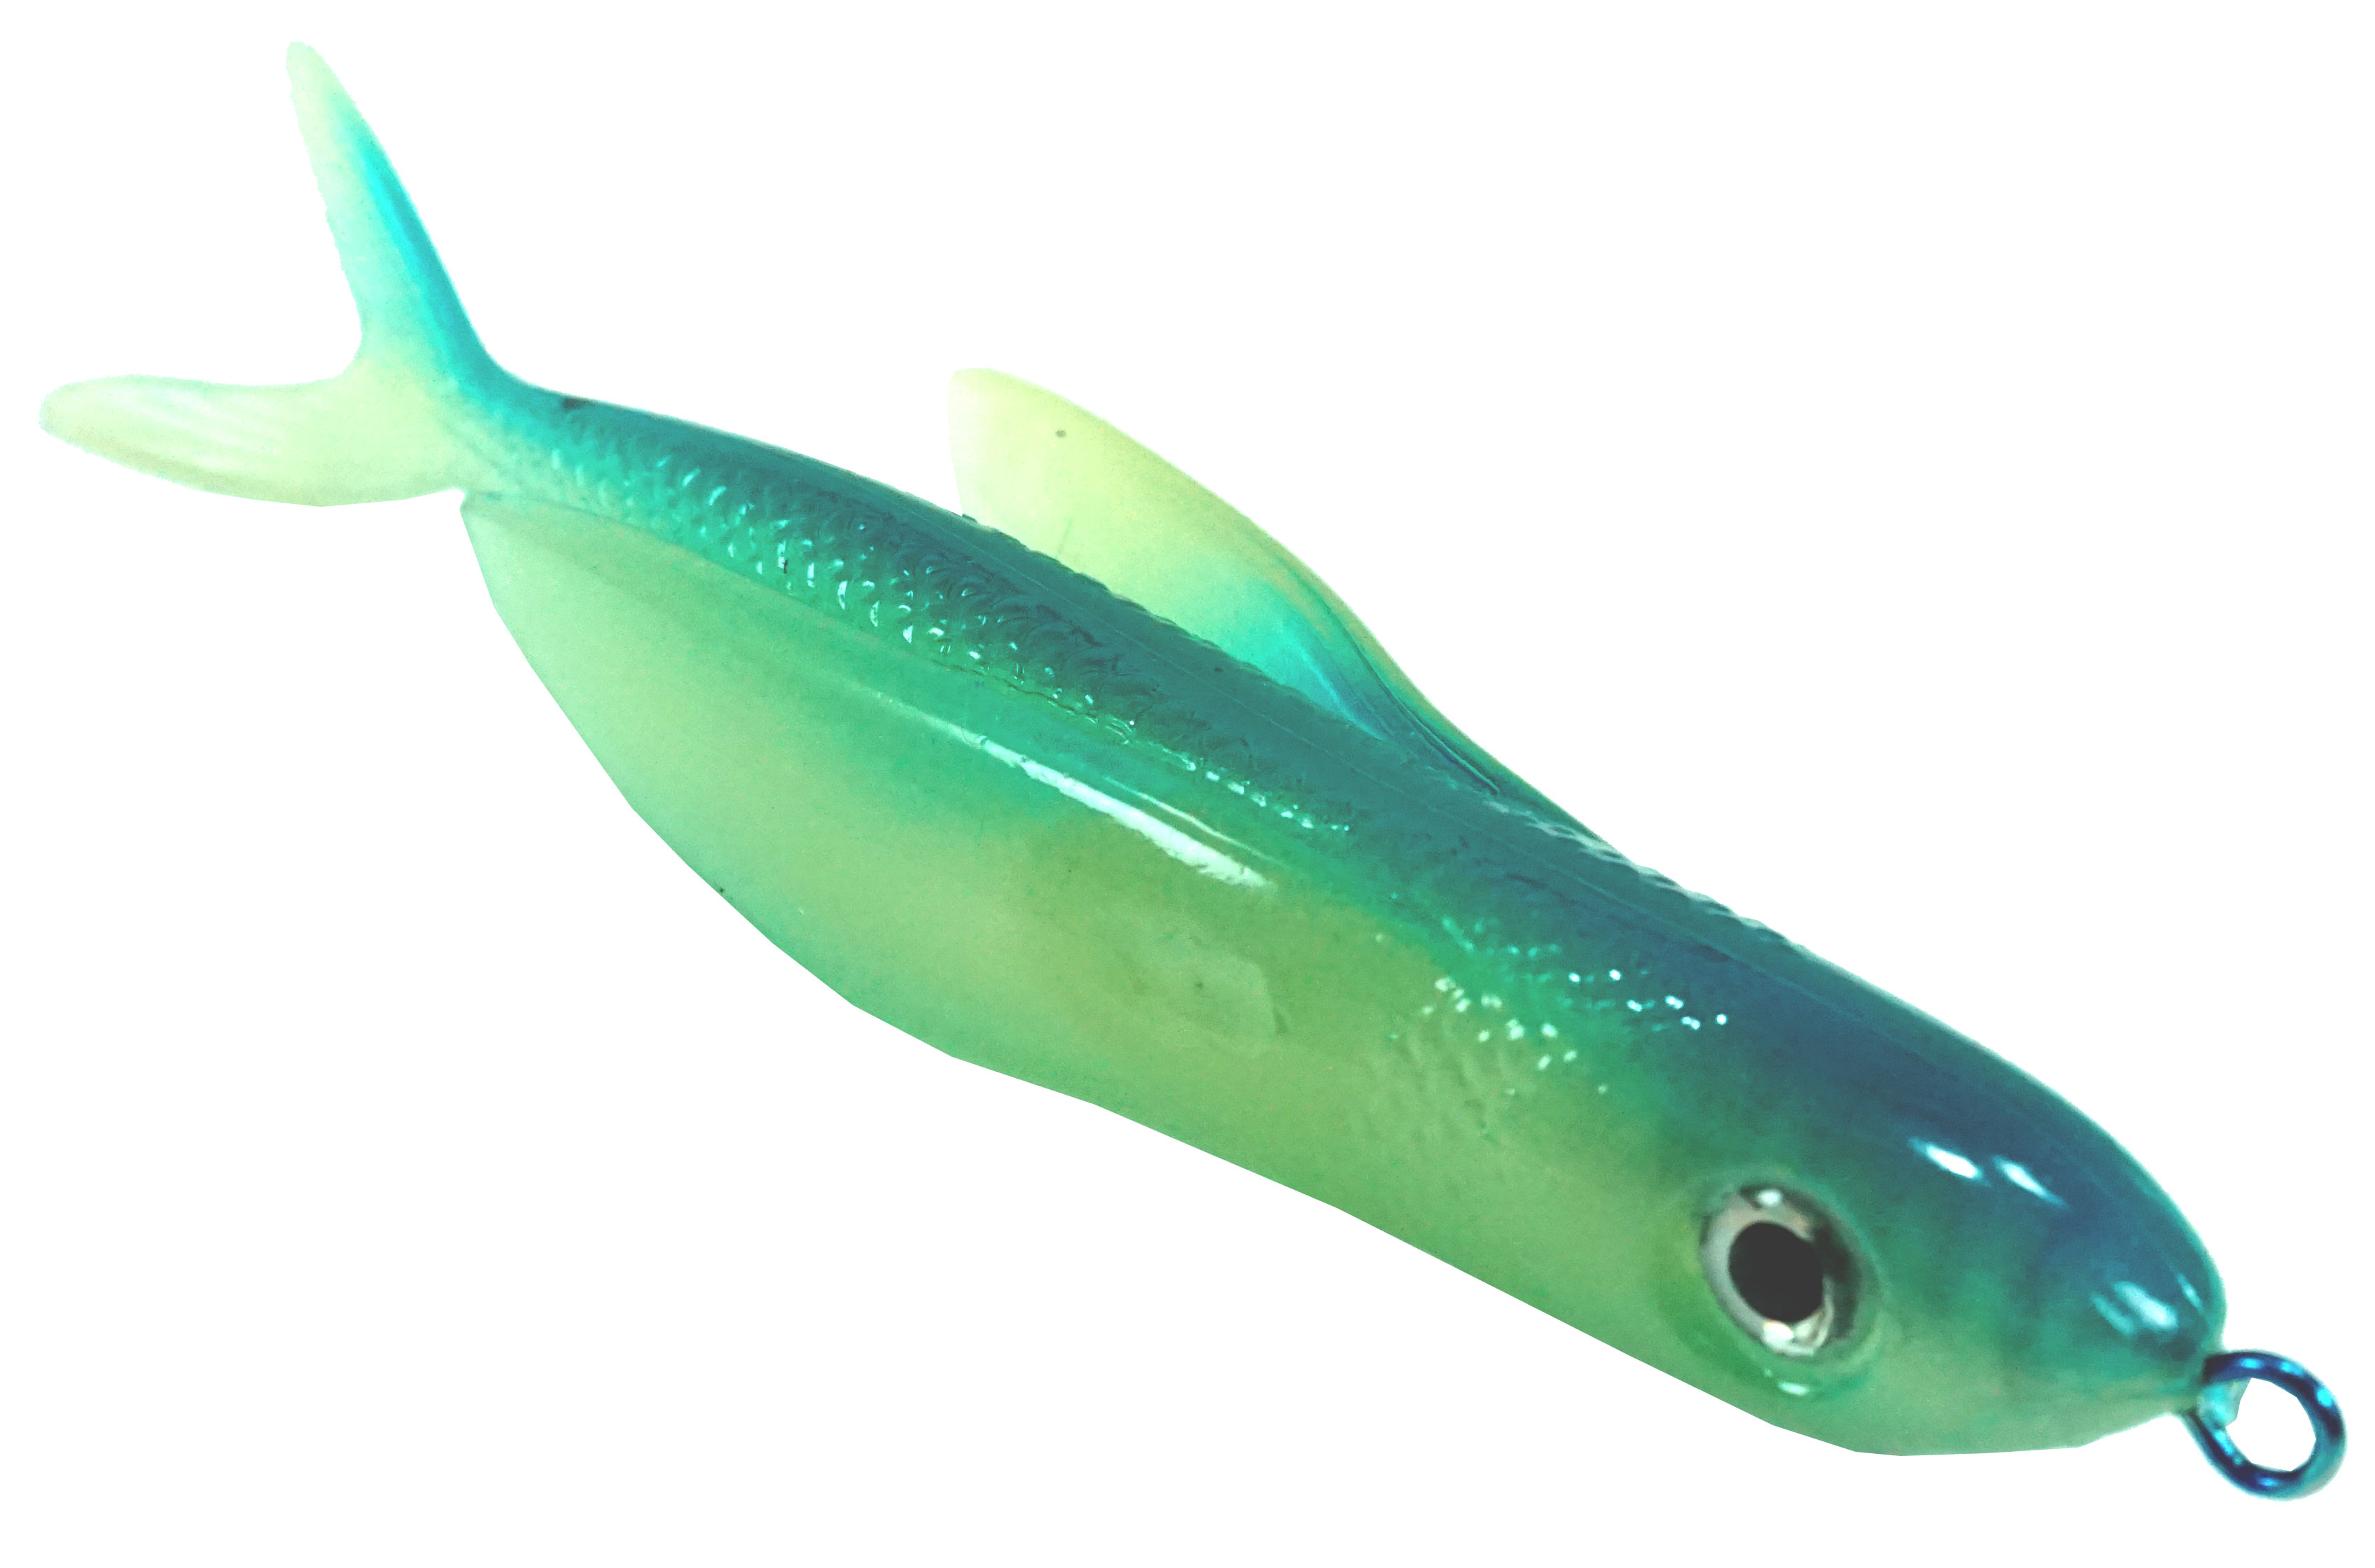 Almost Alive Lures 8.5" Soft Plastic Flying Fish with Swept Back Wing Bait Bright Blue/Glow with Spring